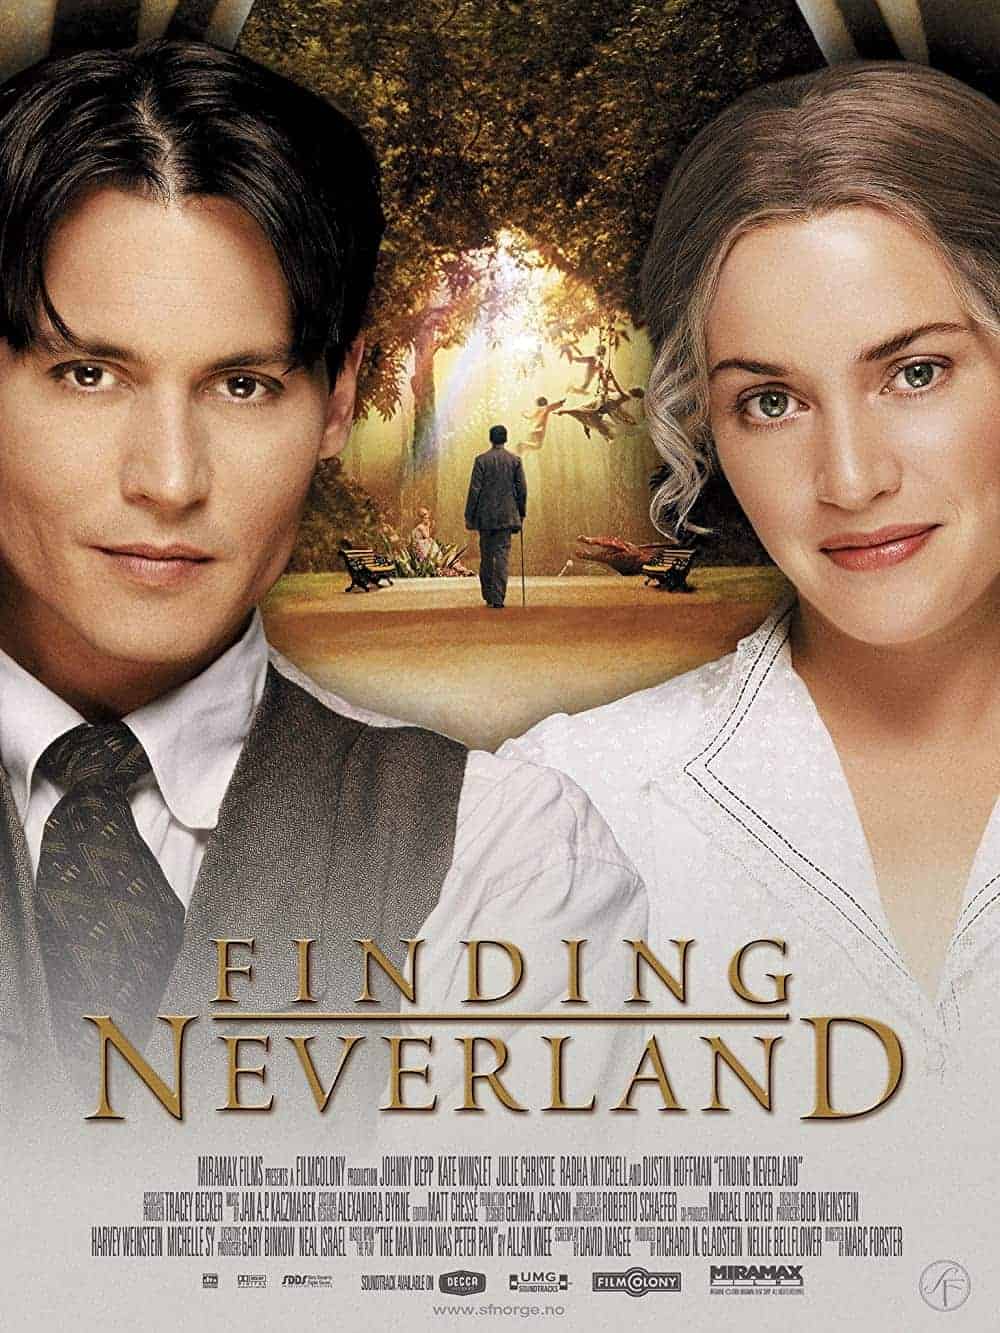 Finding Neverland (2004) 13 Best Johnny Depp Movies (Ranked)